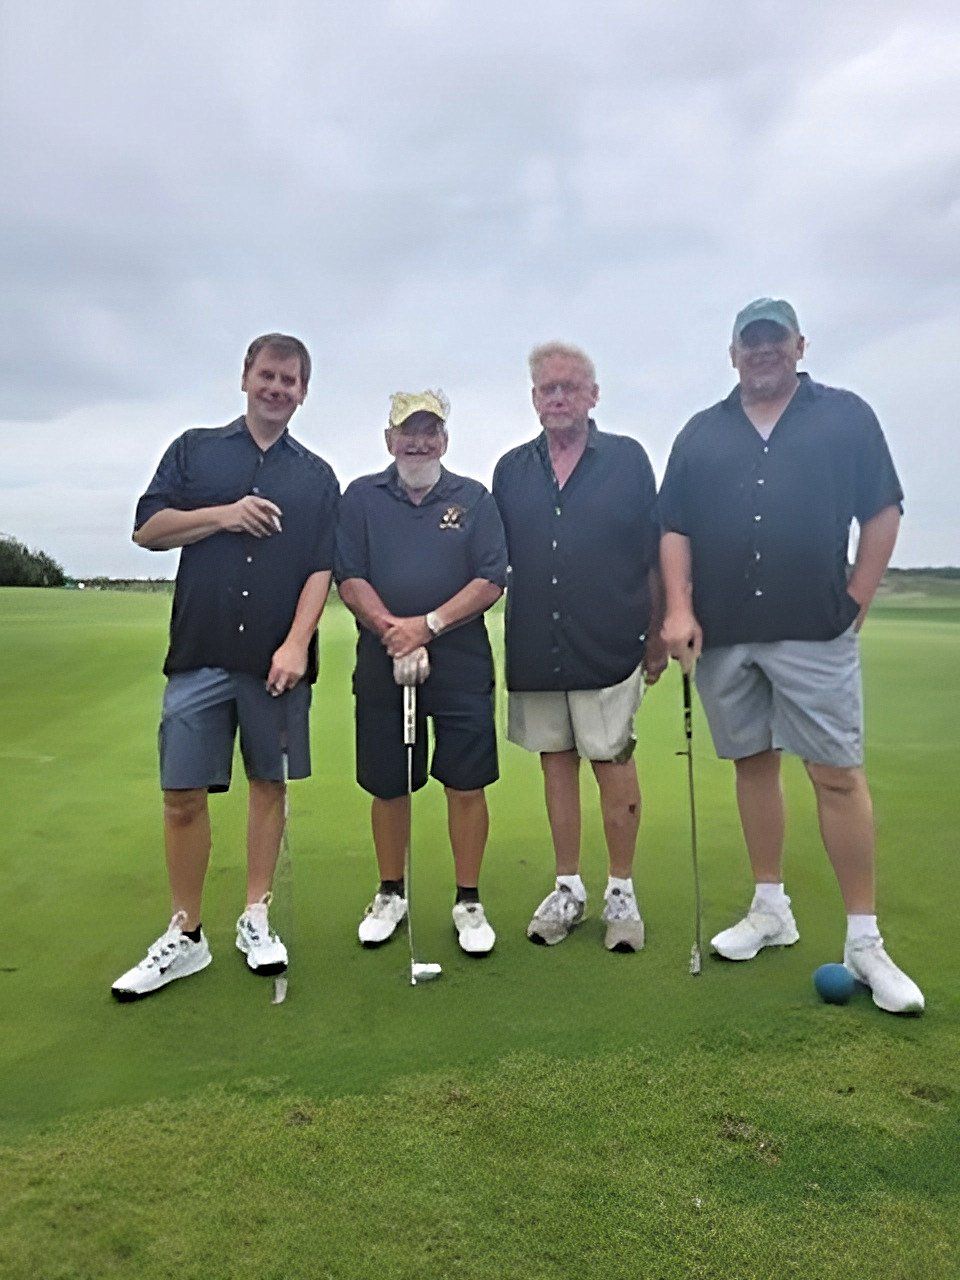 a group of men are standing on a golf course holding golf clubs .